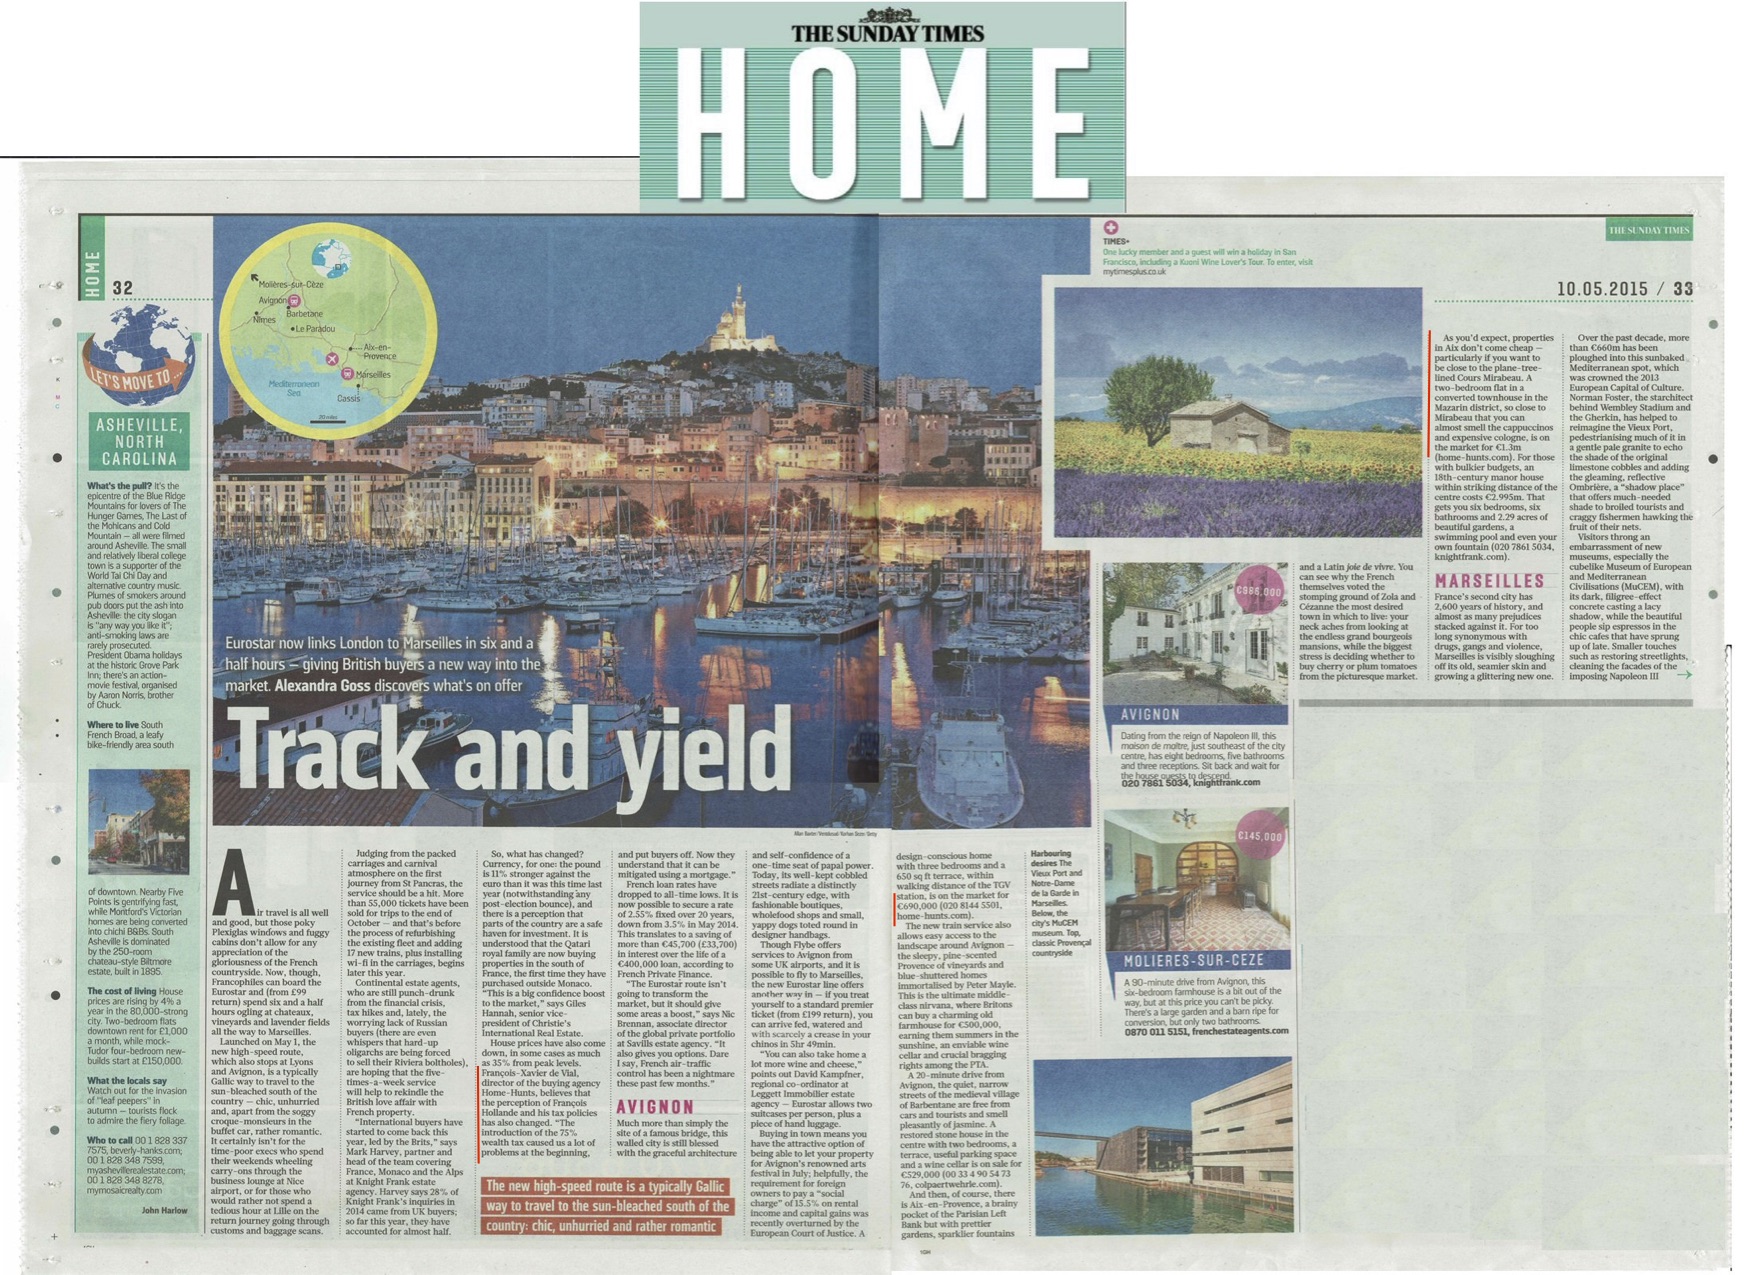 Sunday Times – What’s on offer in Marseille….